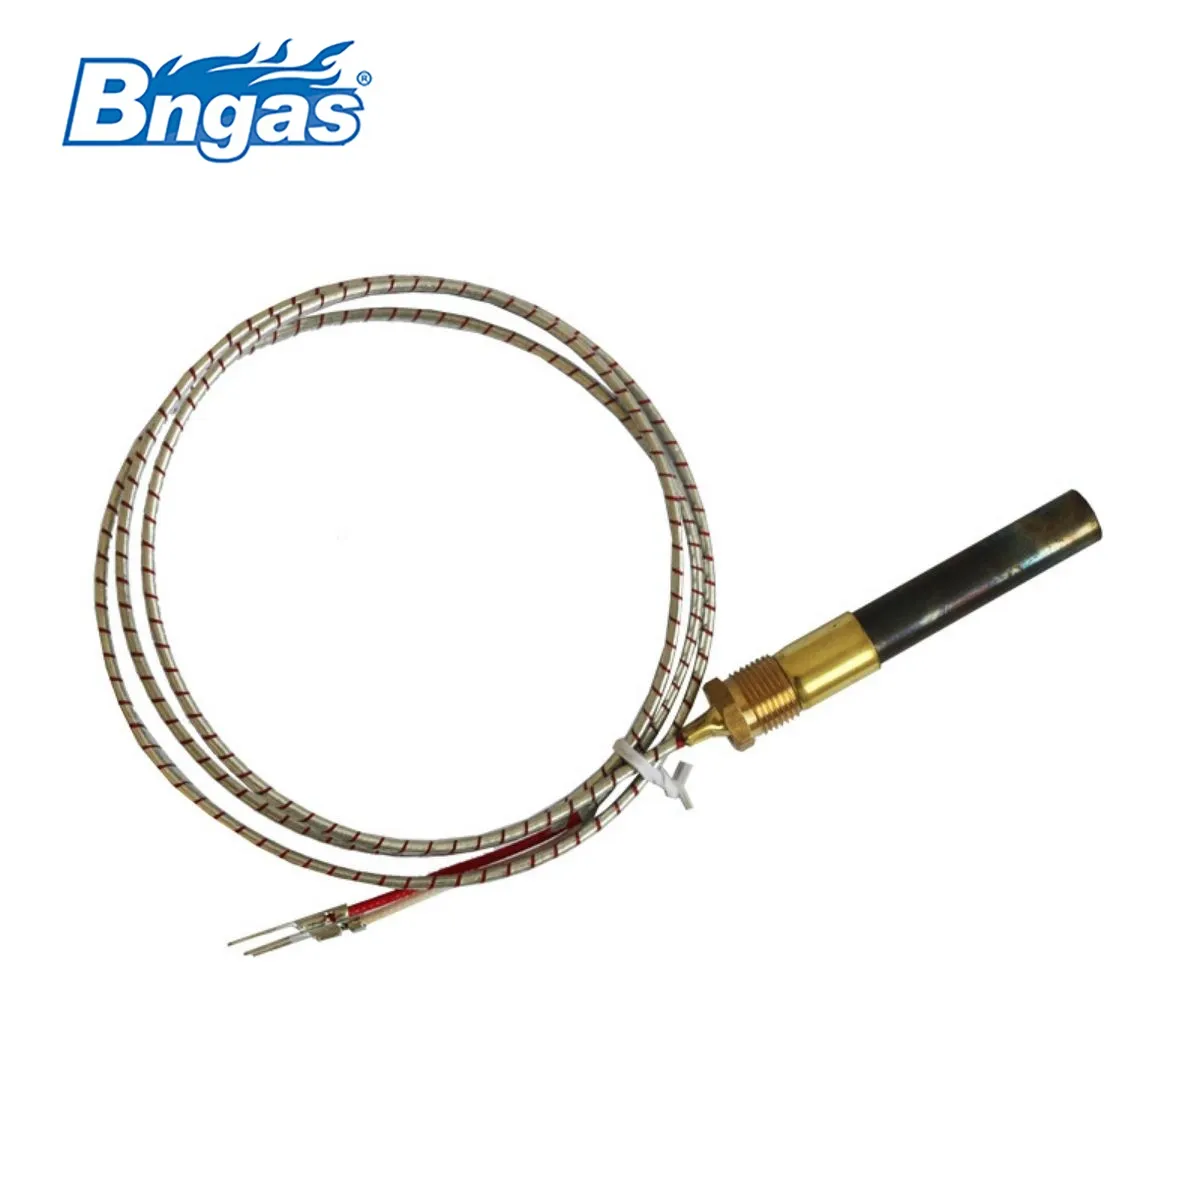 Gas heizung thermoelement thermopile temperatur sensor